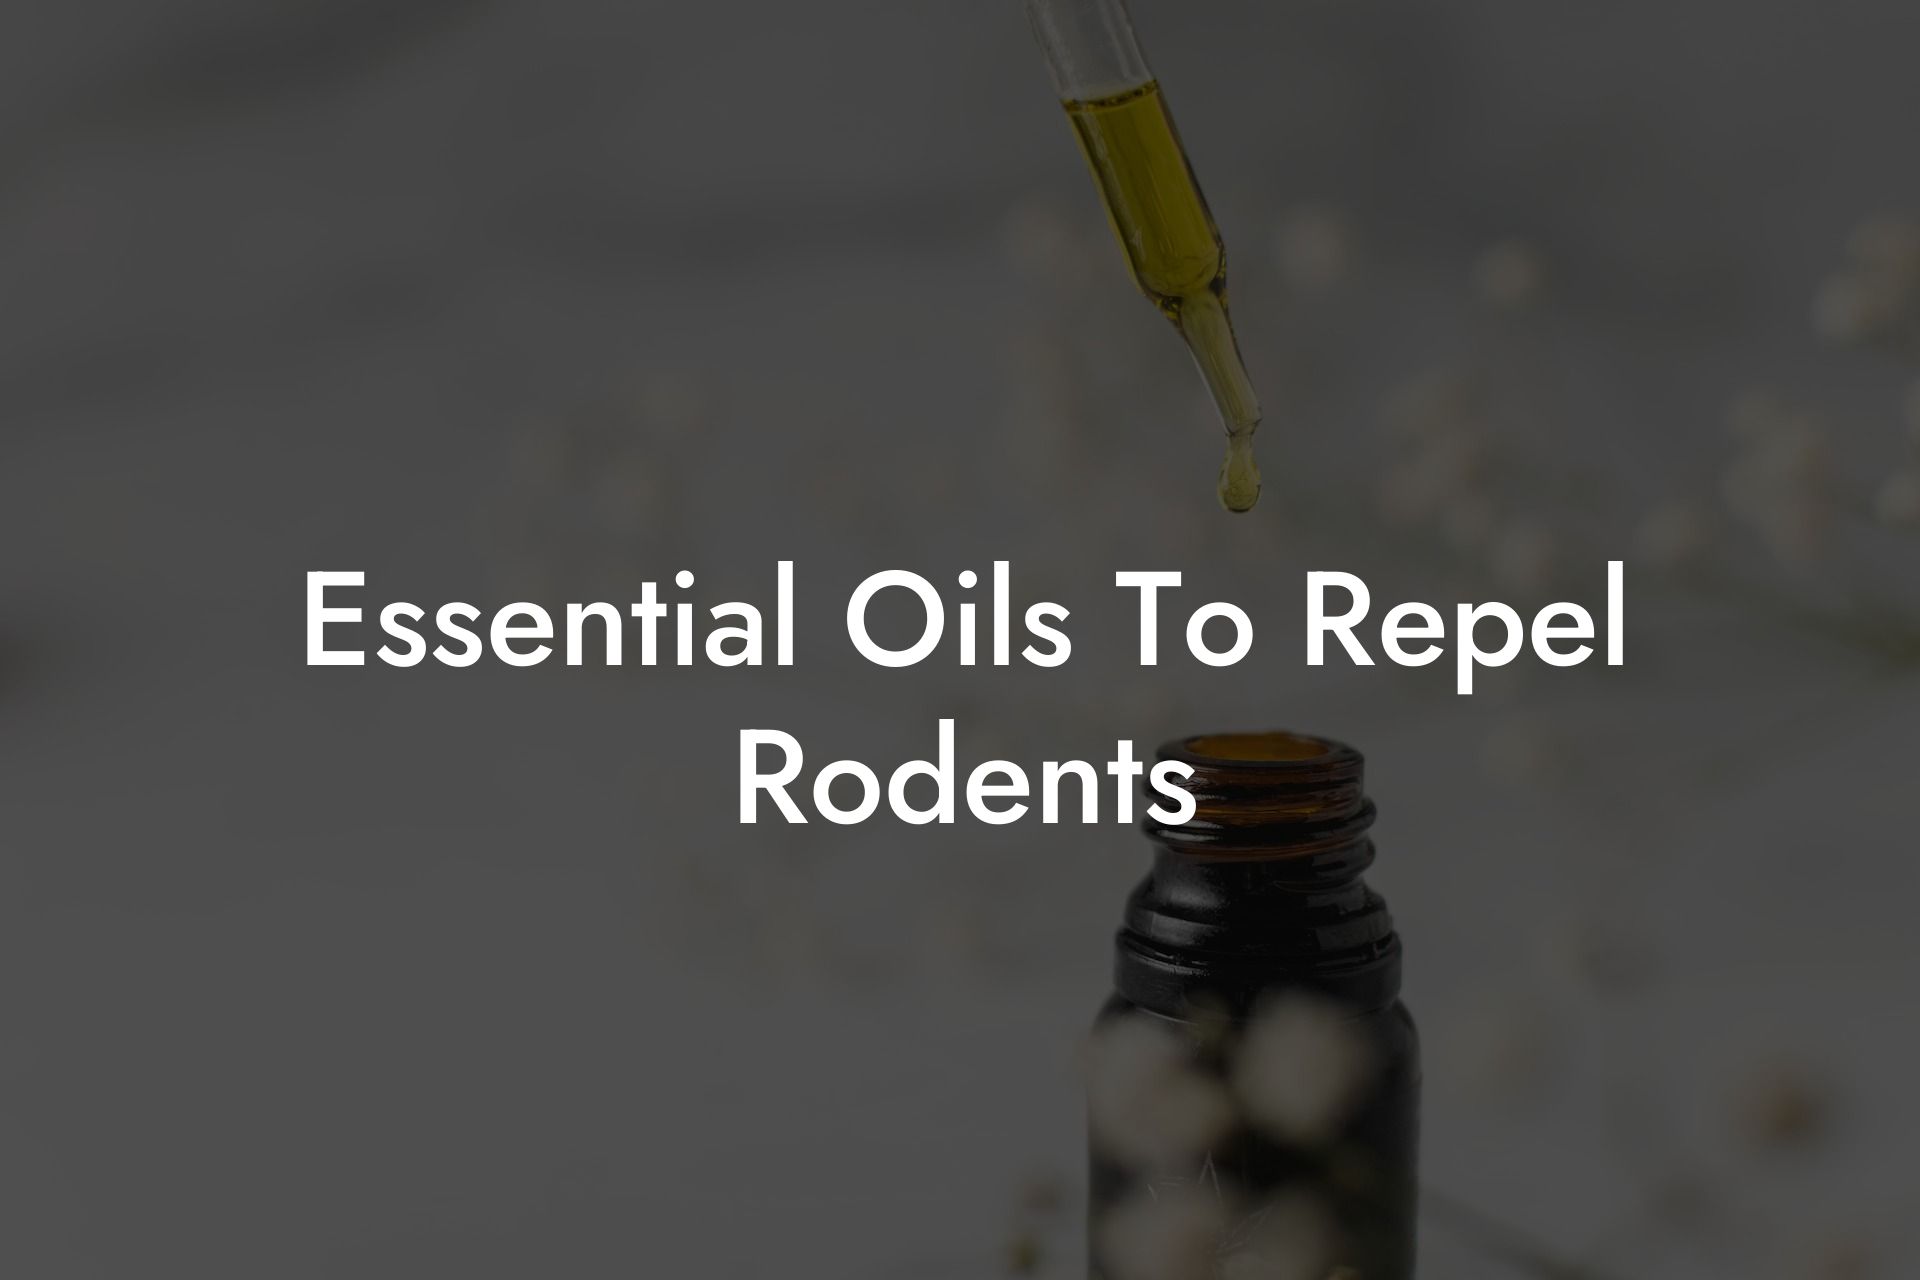 Essential Oils To Repel Rodents